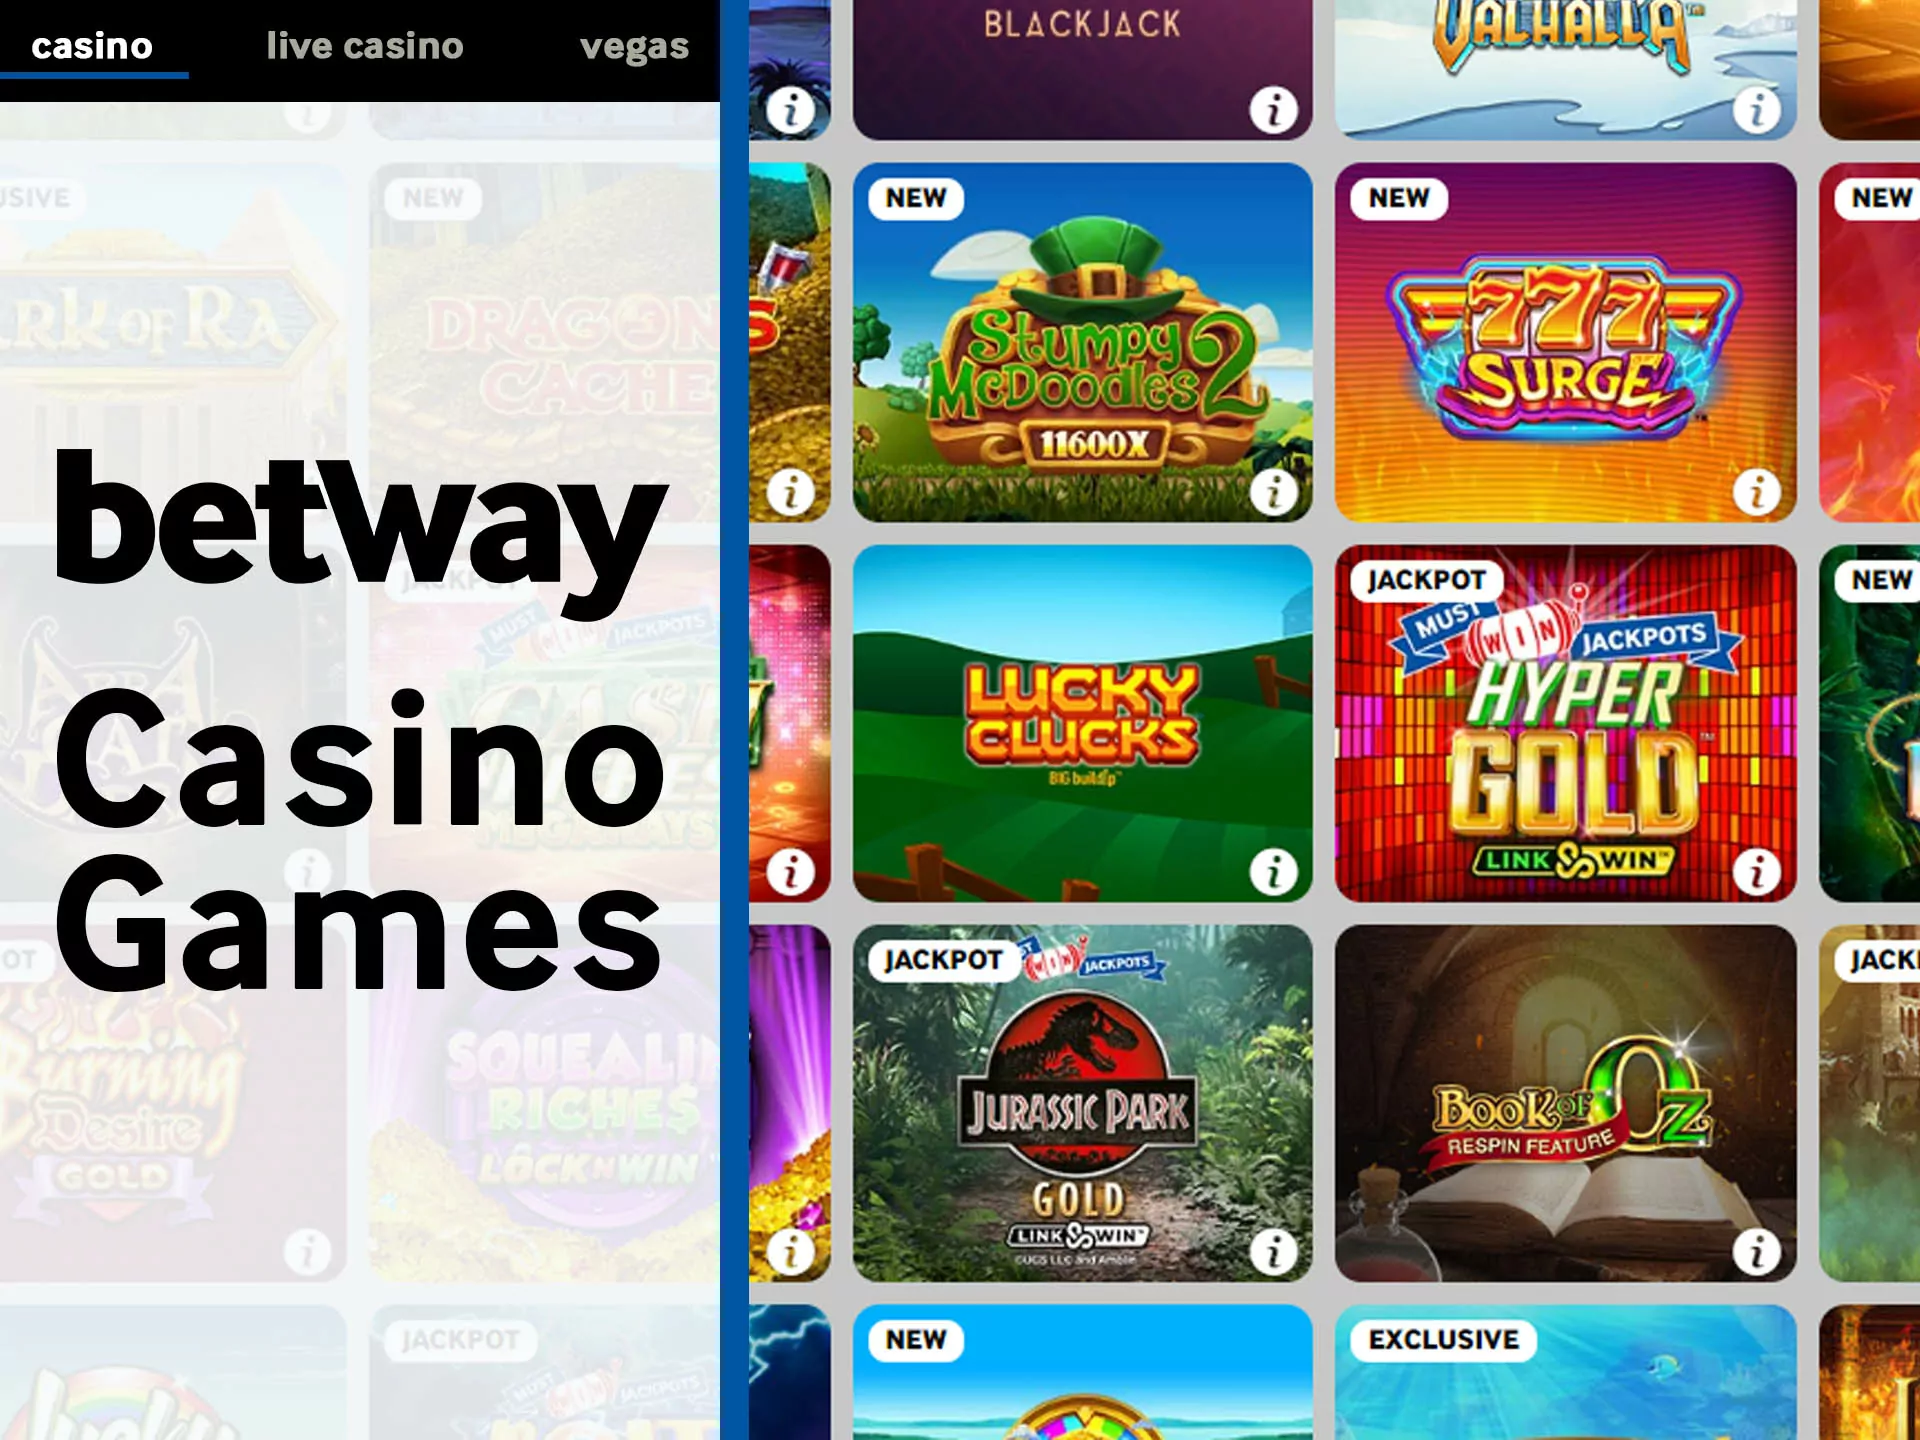 Betway has many casino games for play.